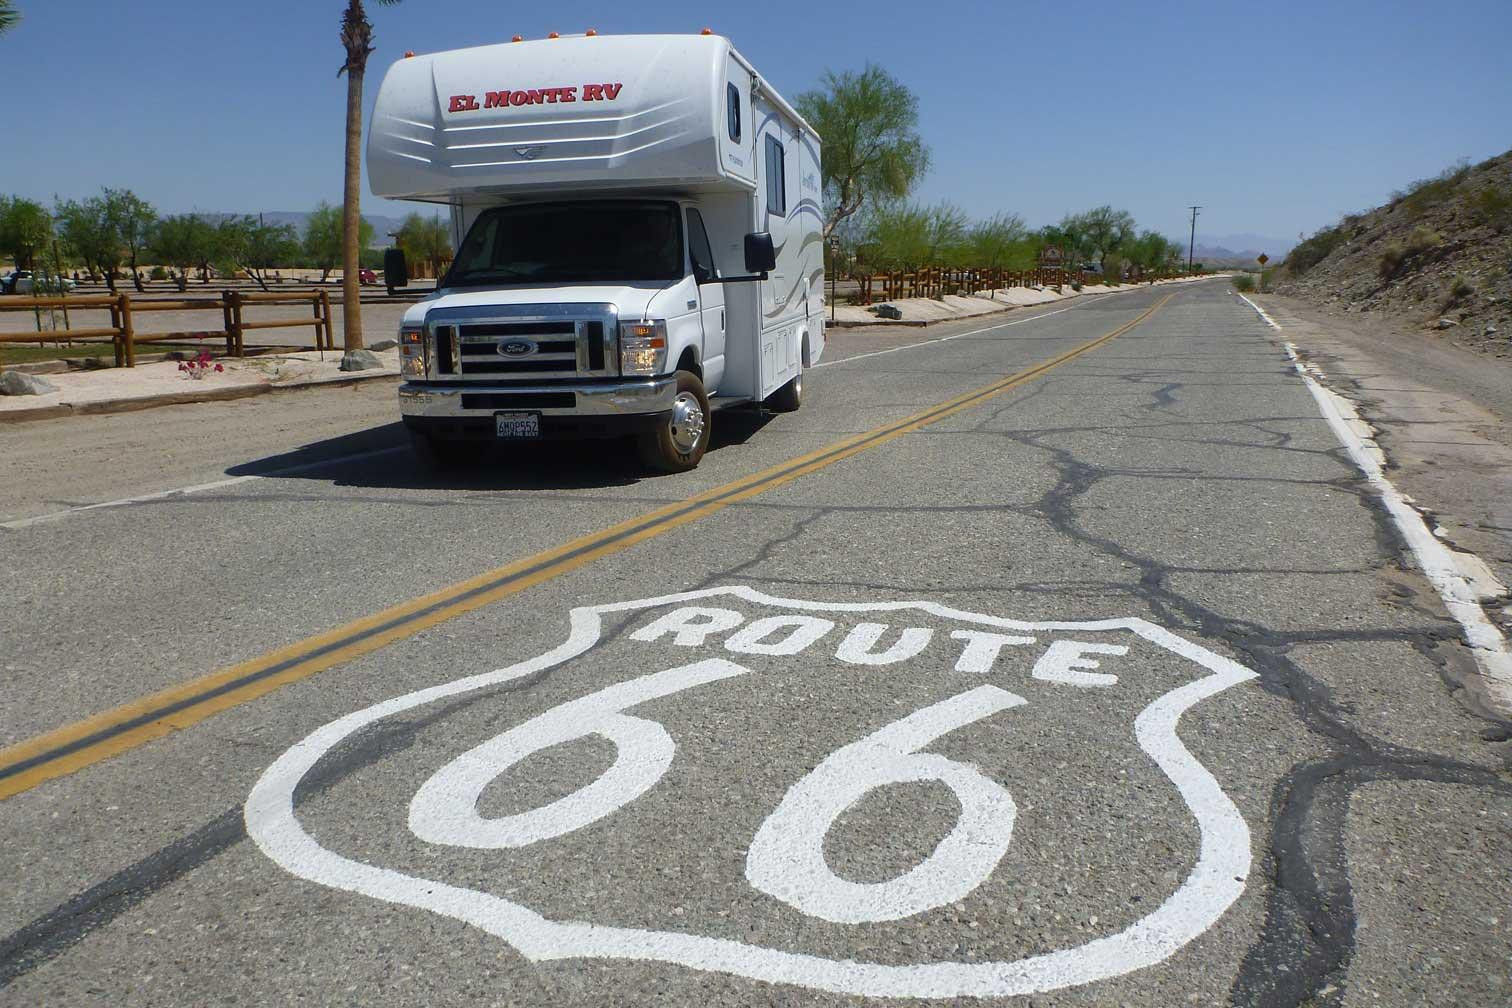 Travel Route 66 by RV